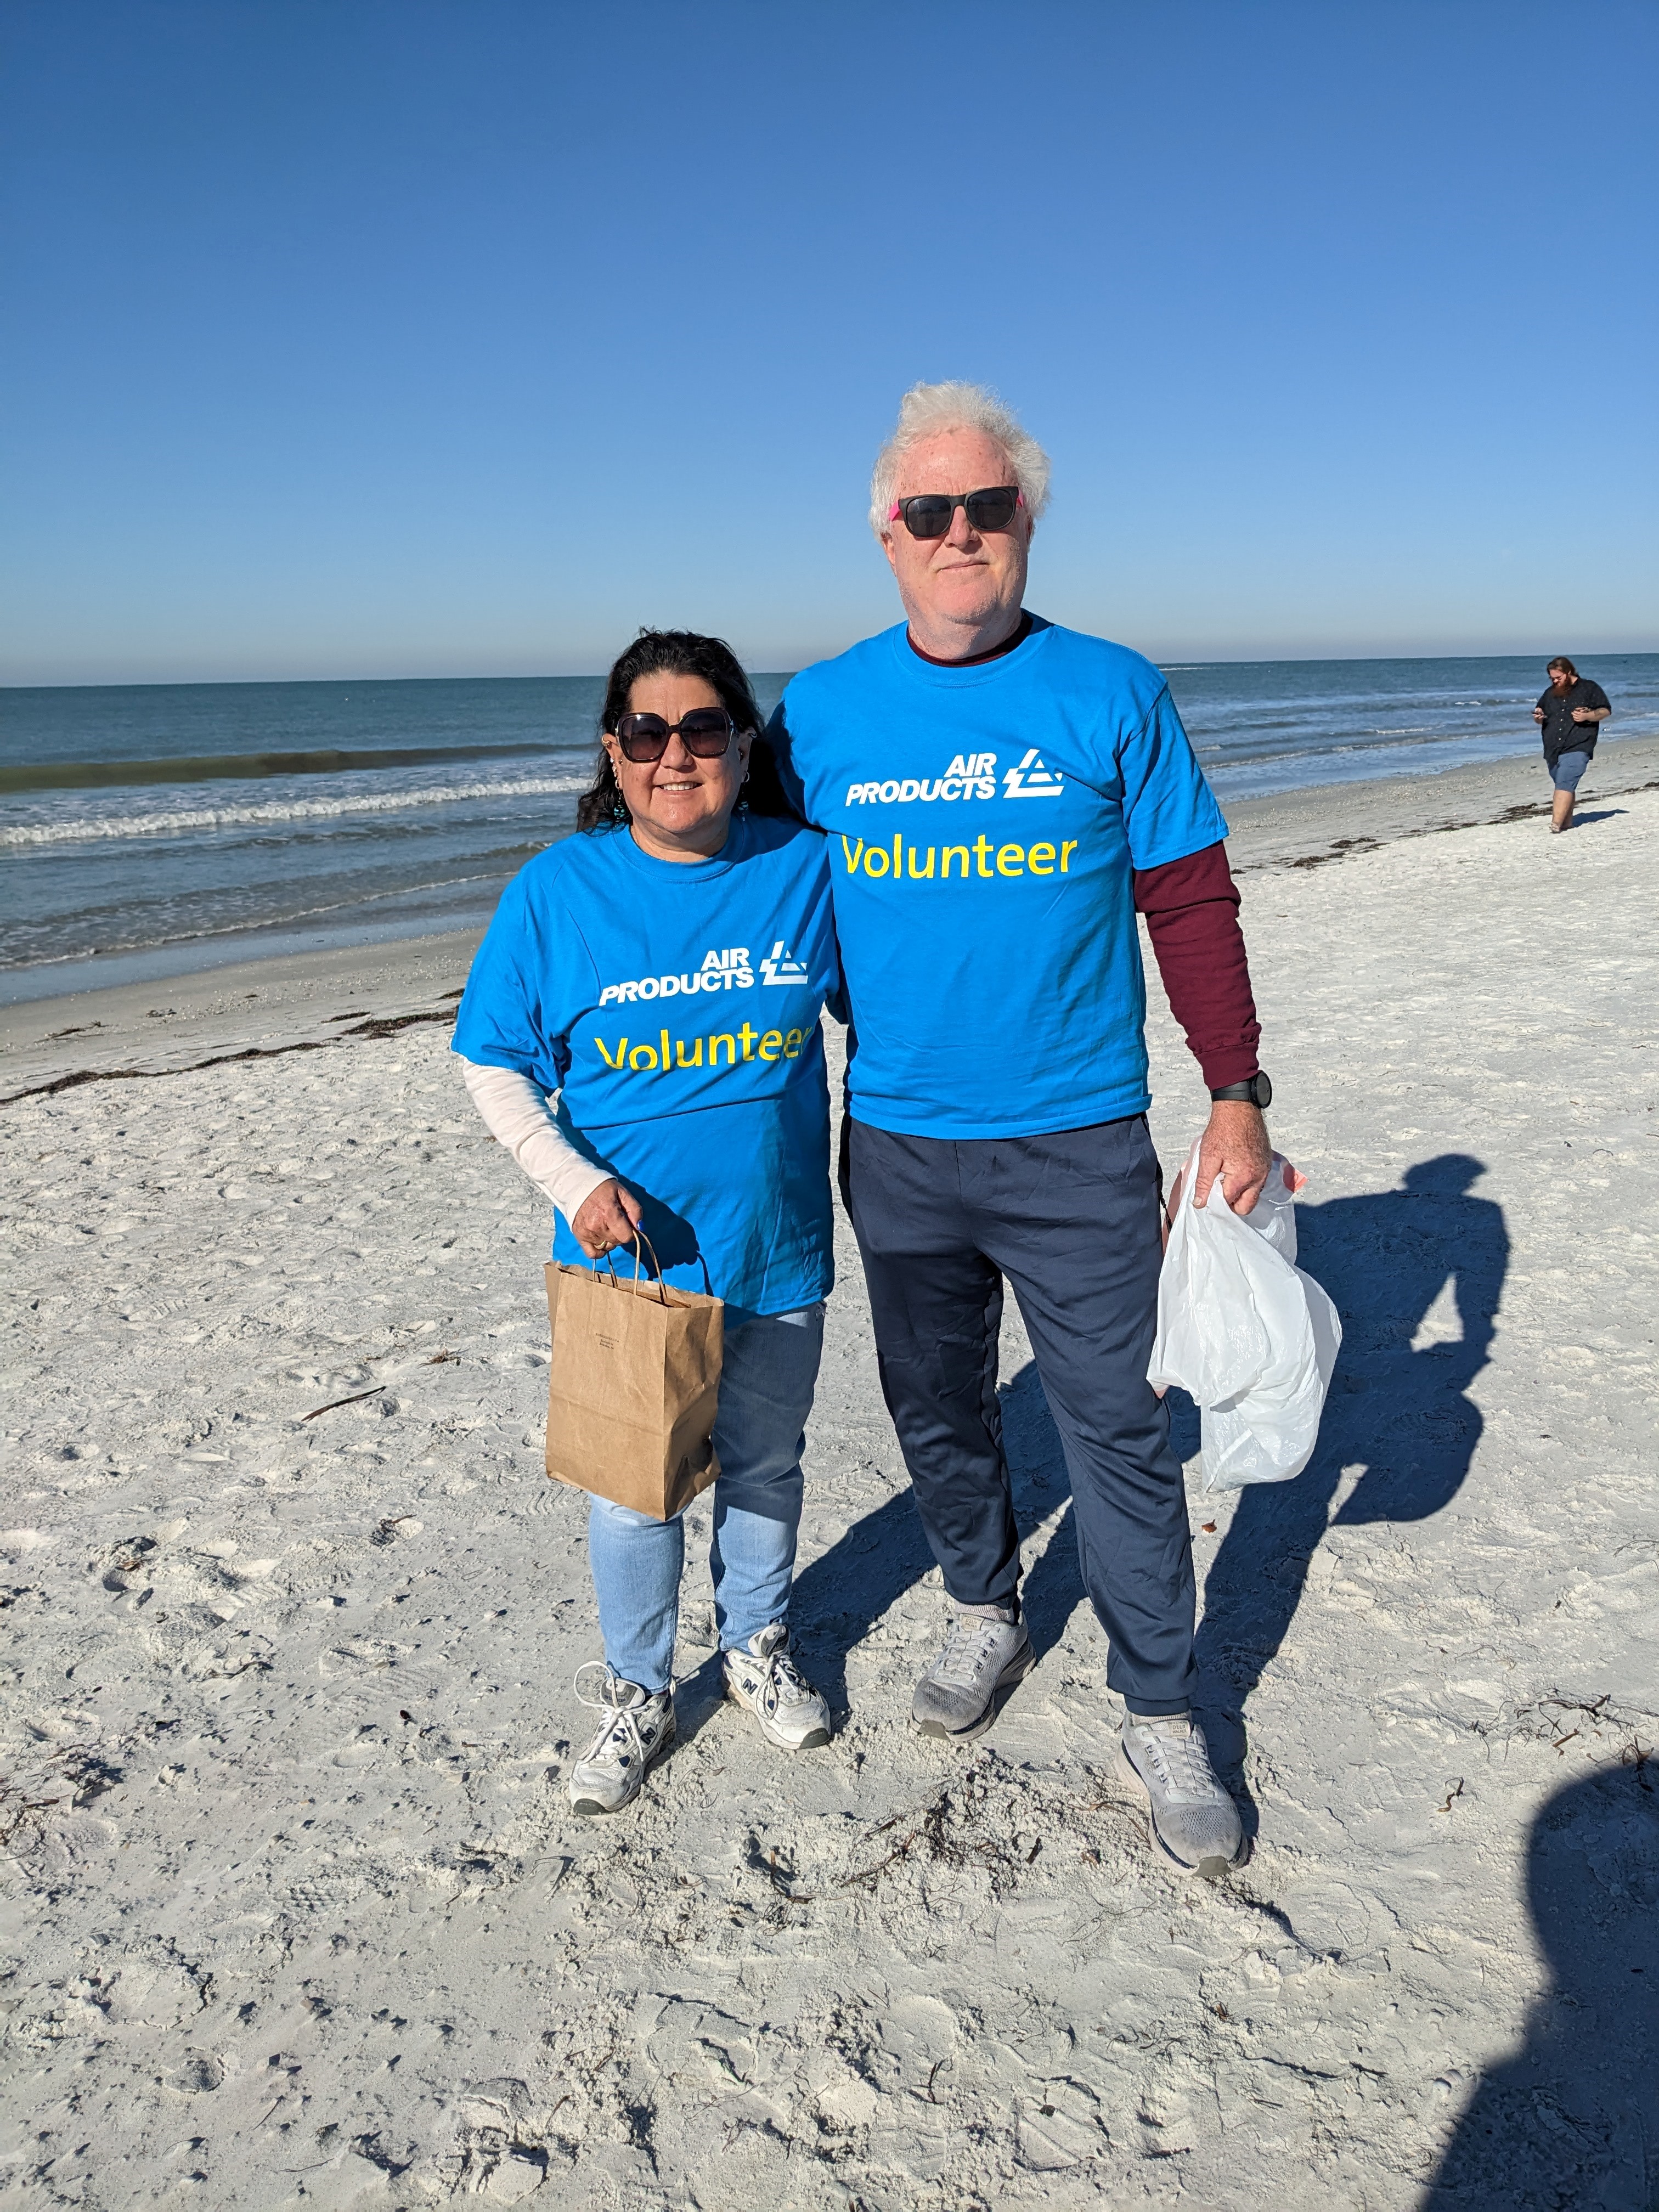 Becky alongside her husband, Tom, cleaning up Indian Rocks Beach near their home for Volunteer Day/MLK Day of Service for Air Products.